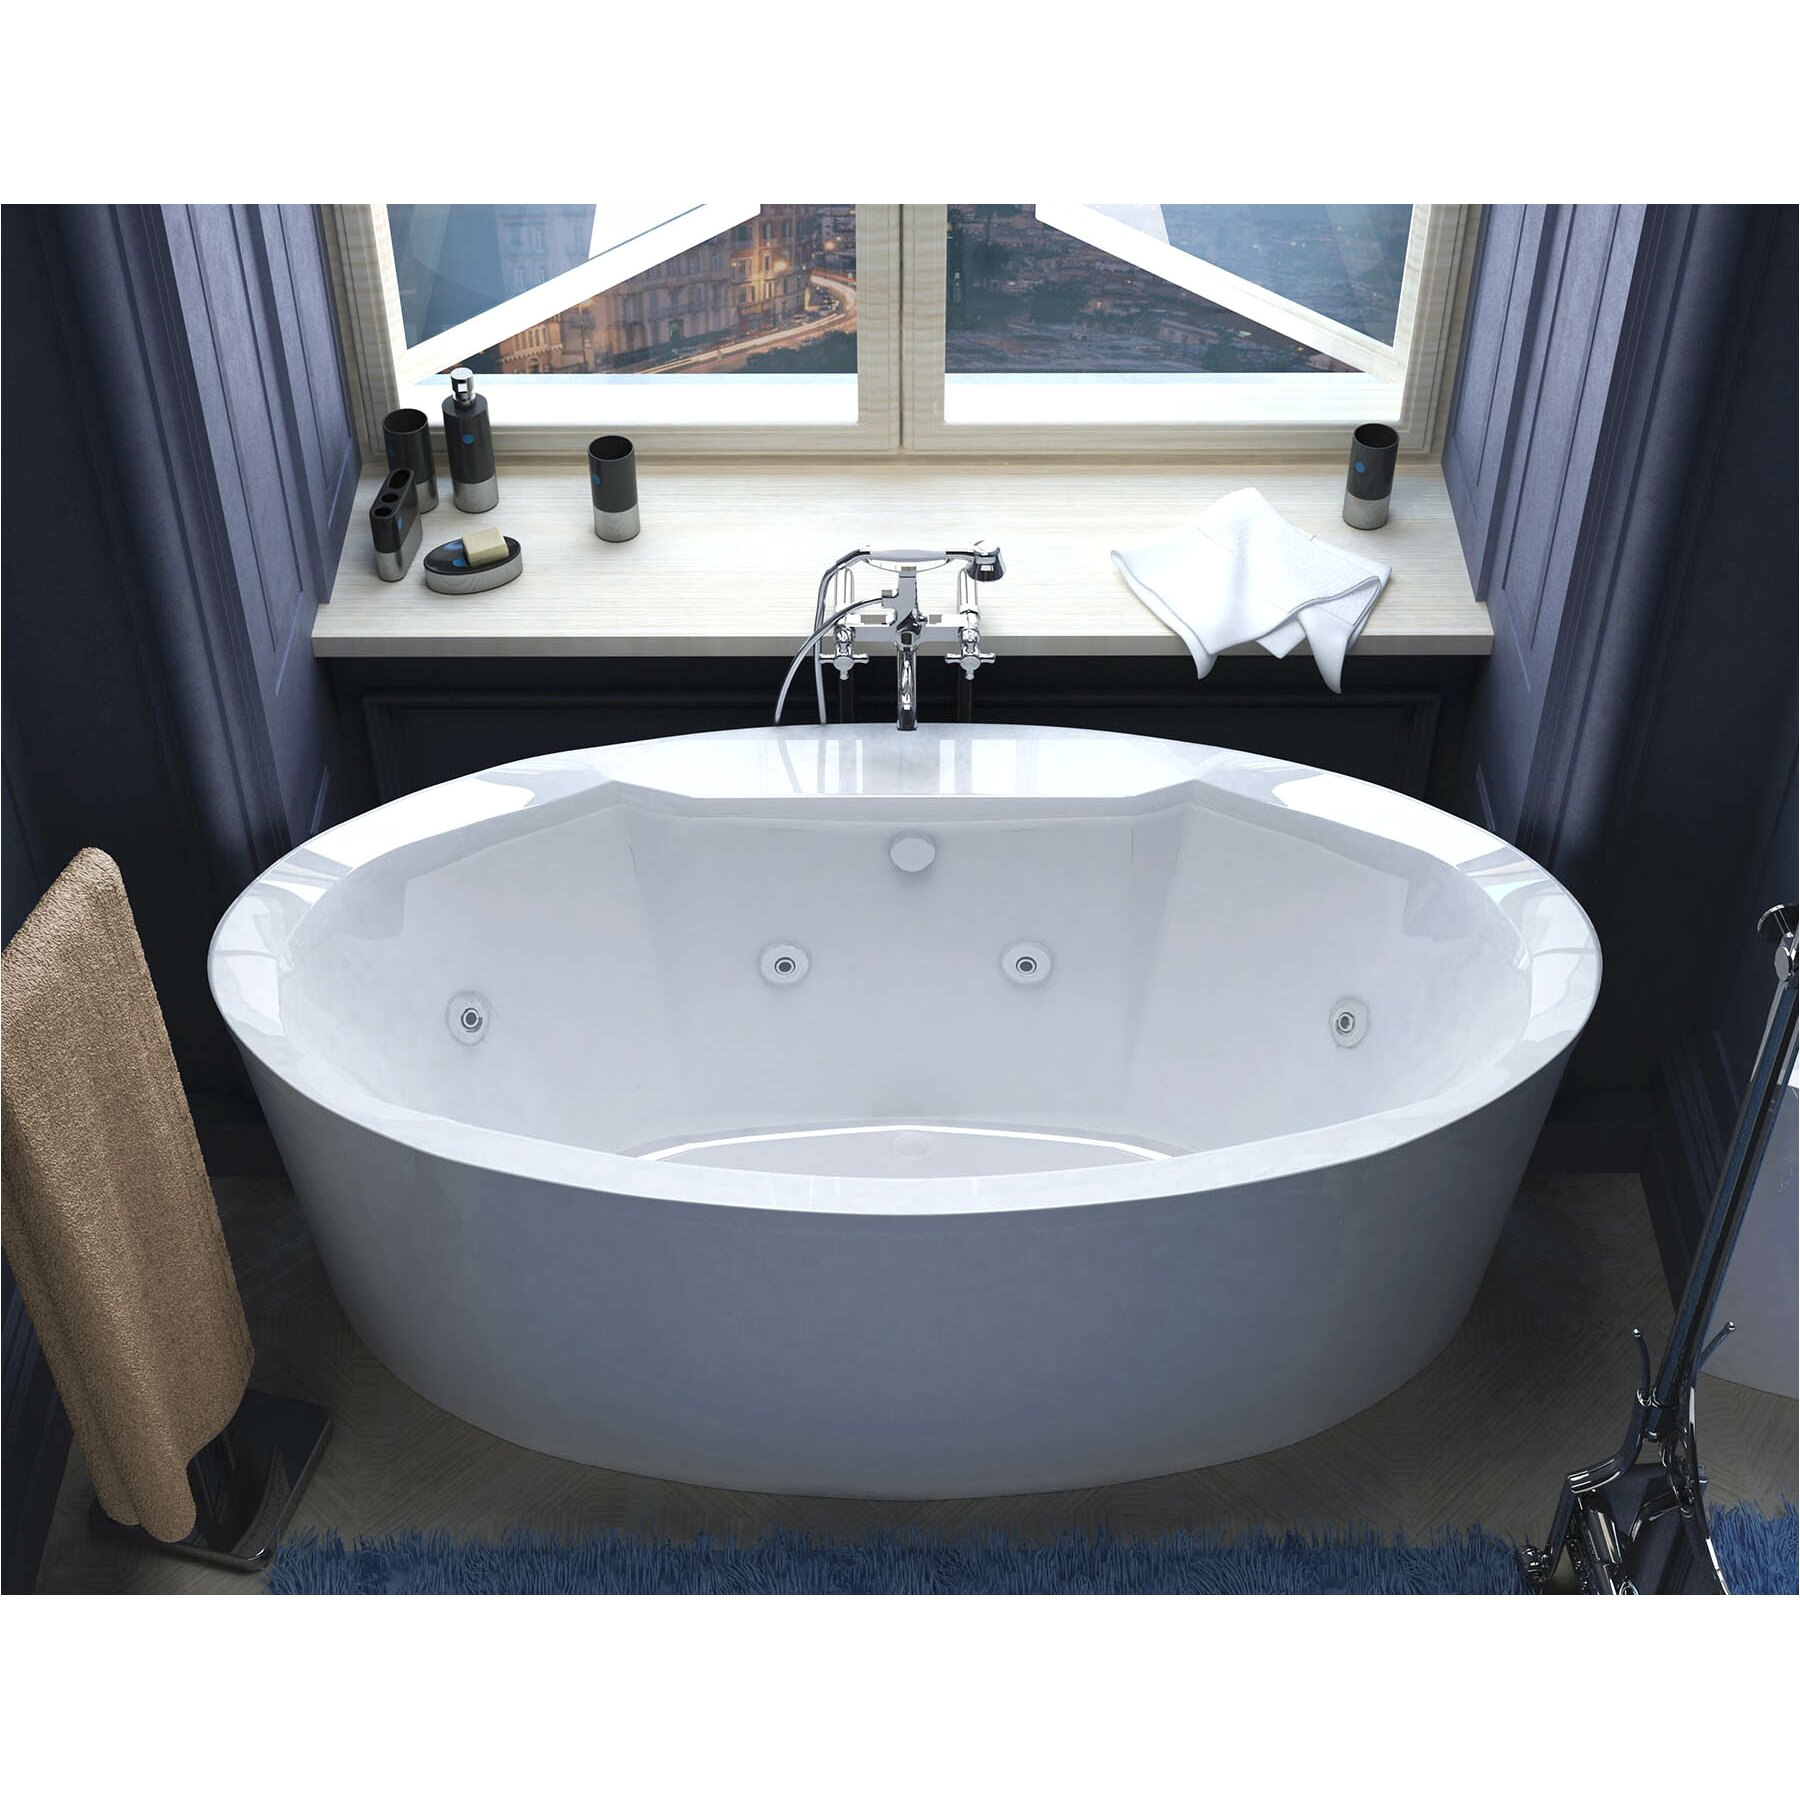 Freestanding Bathtubs for Sale Spa Escapes Salina 67 18" X 33 43" Oval Freestanding